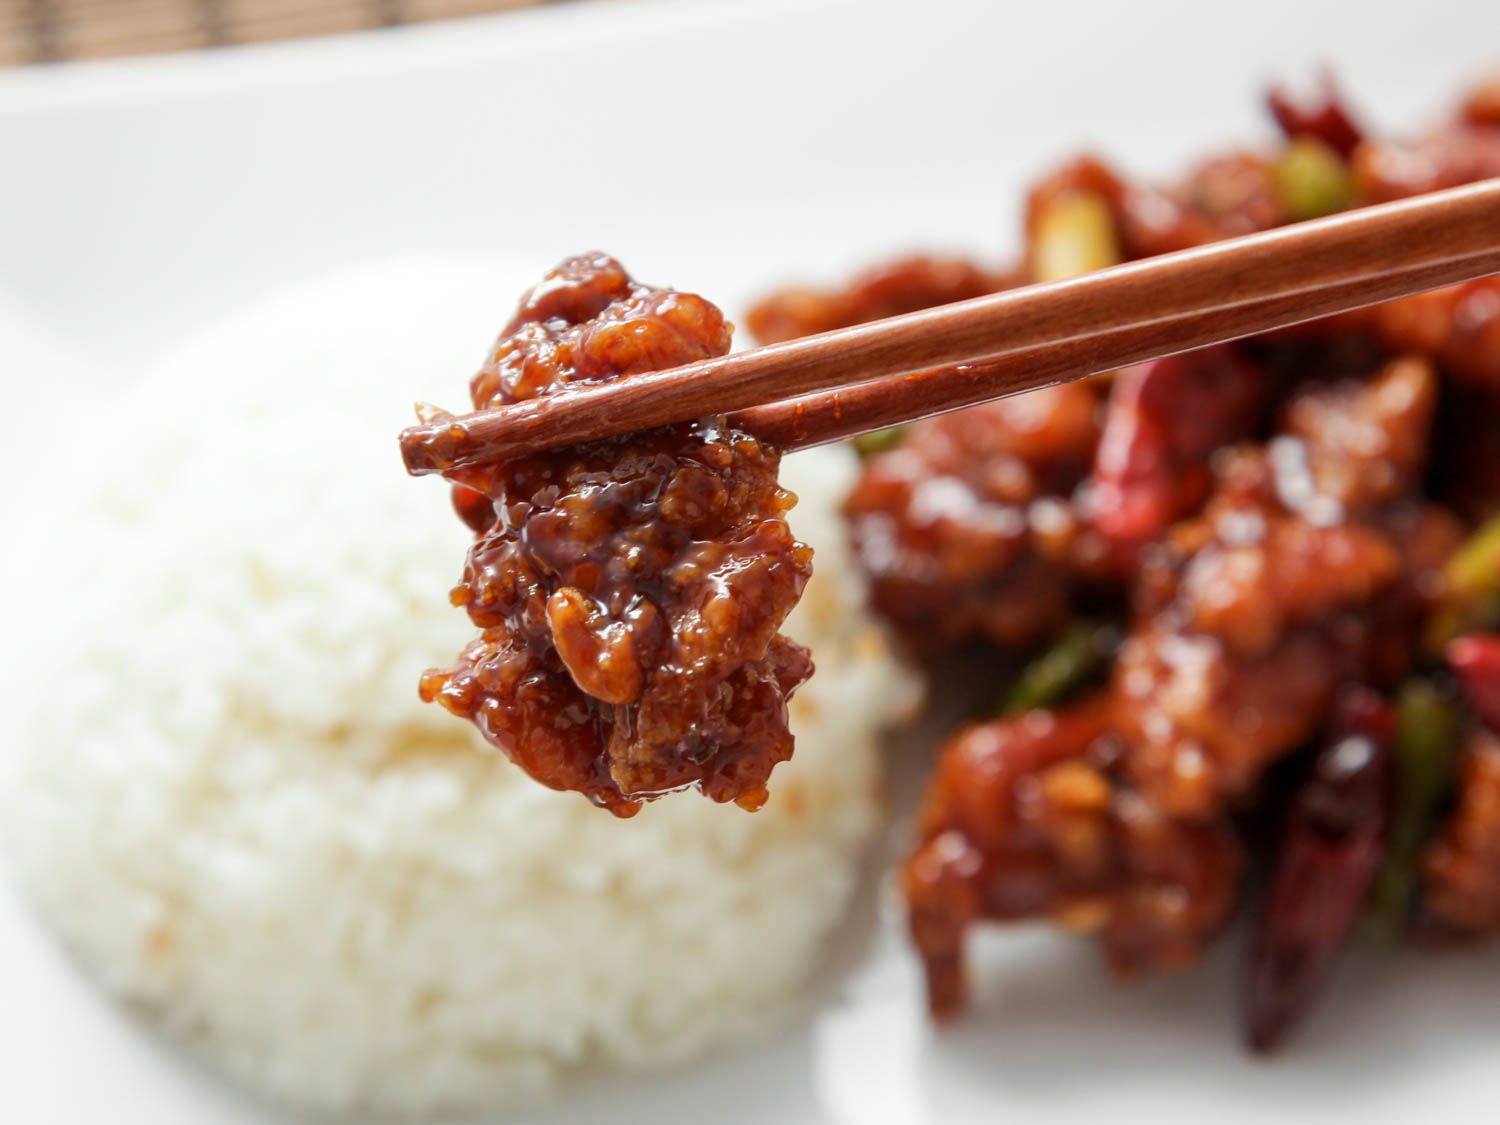 Using chopsticks to hold a piece of General Tso's chicken over a bed of rice, with more chicken in the background.